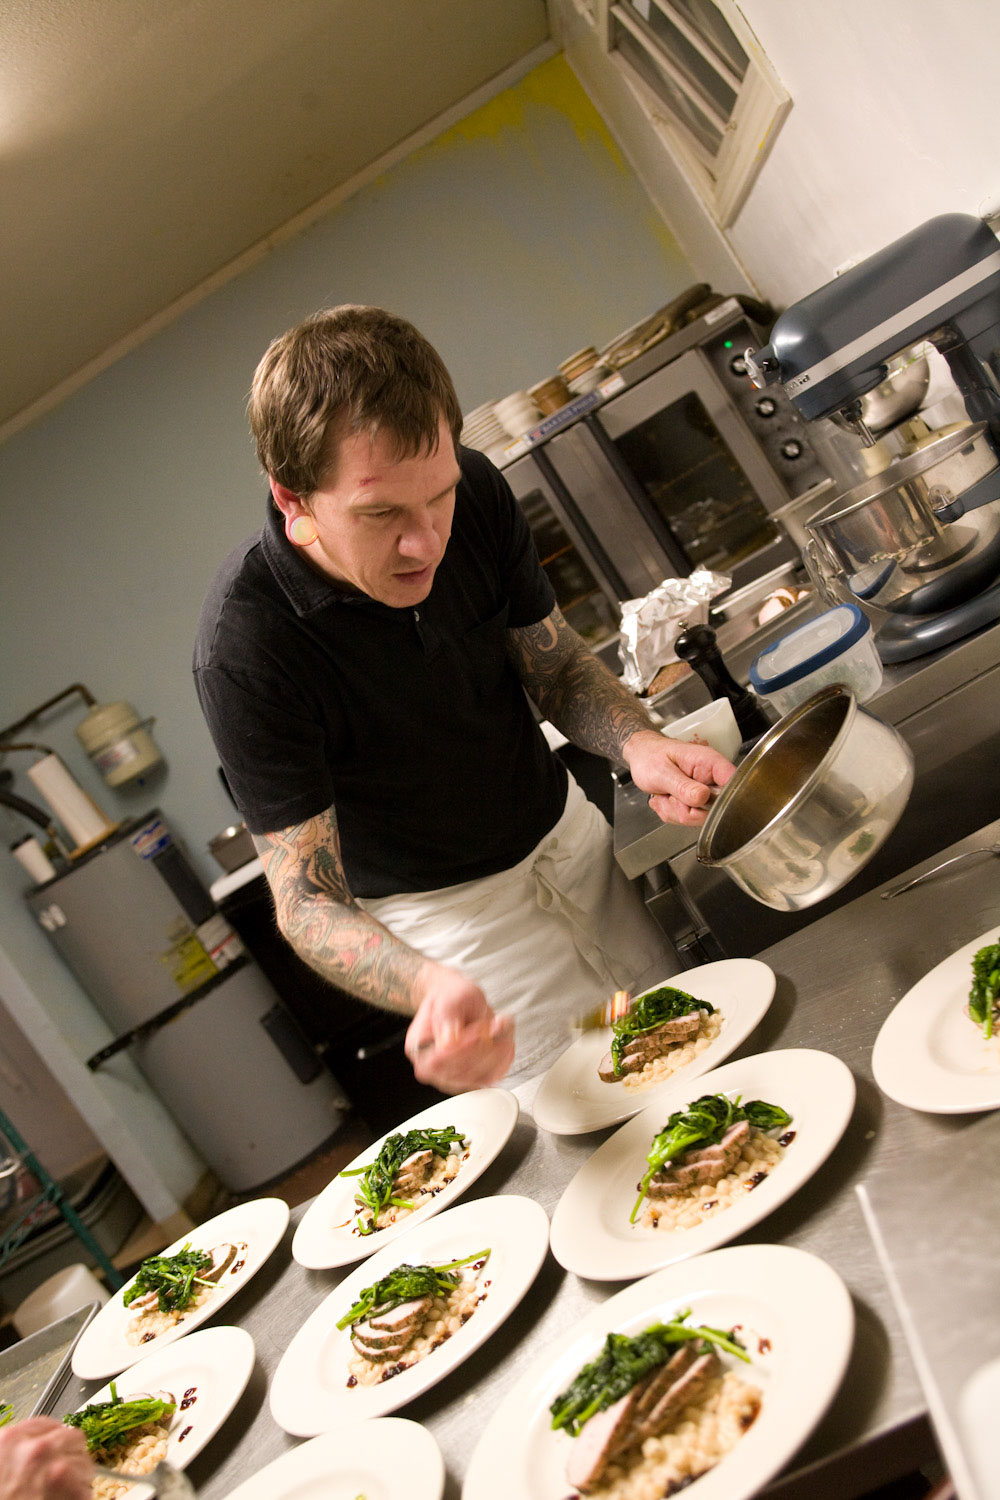 Chef Aaron Solley at James John Cafe setting course plates out in kitchen